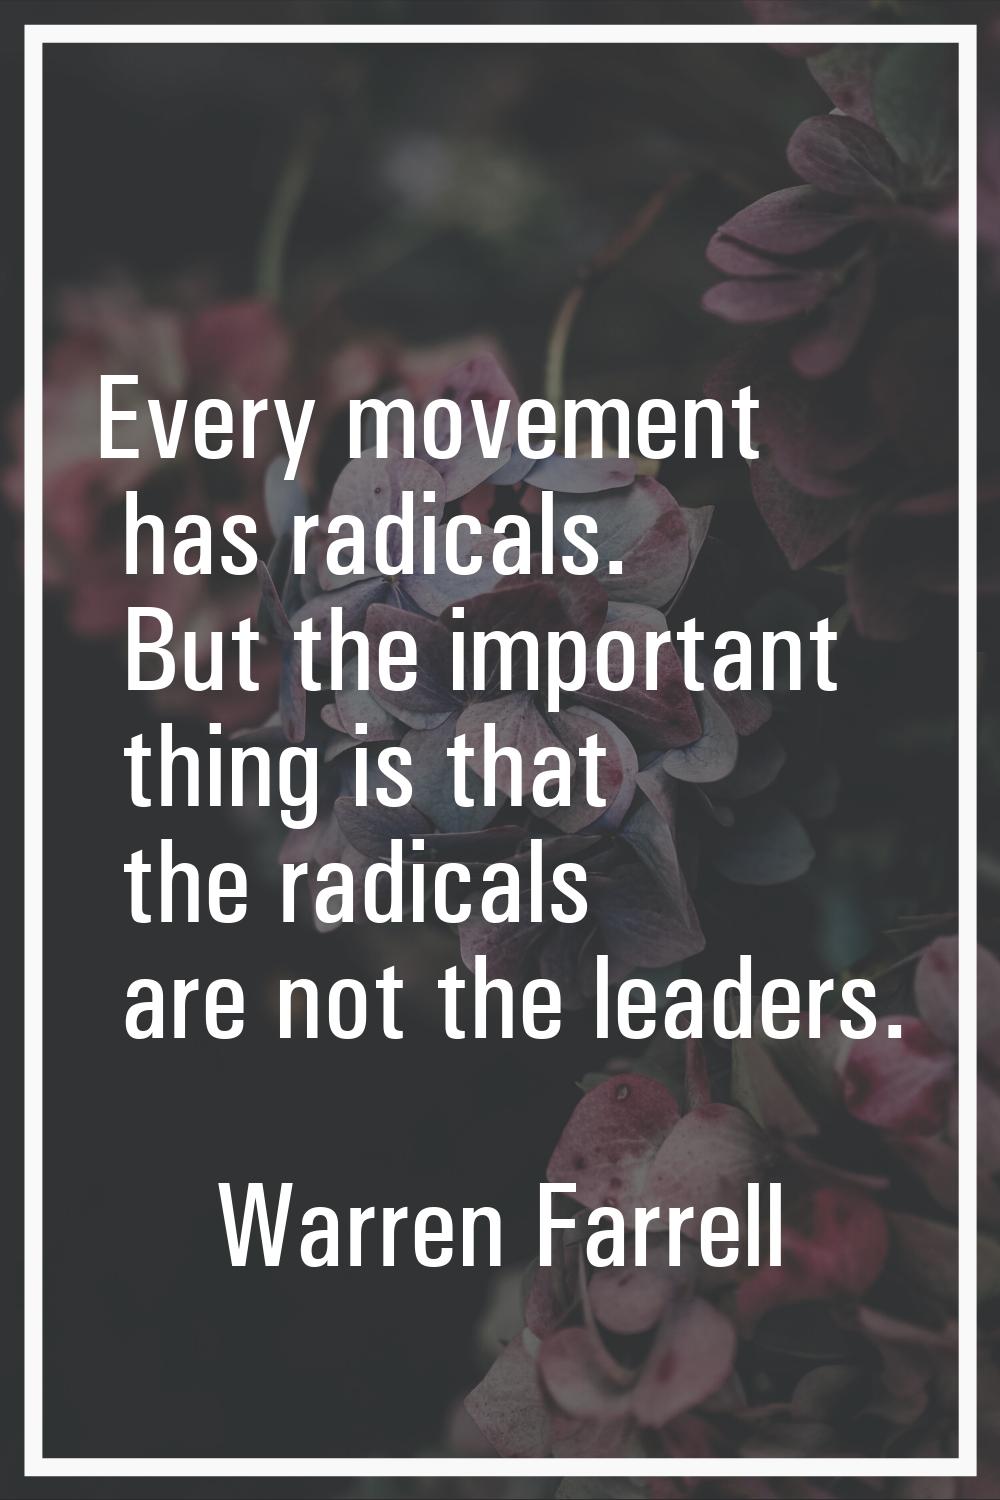 Every movement has radicals. But the important thing is that the radicals are not the leaders.